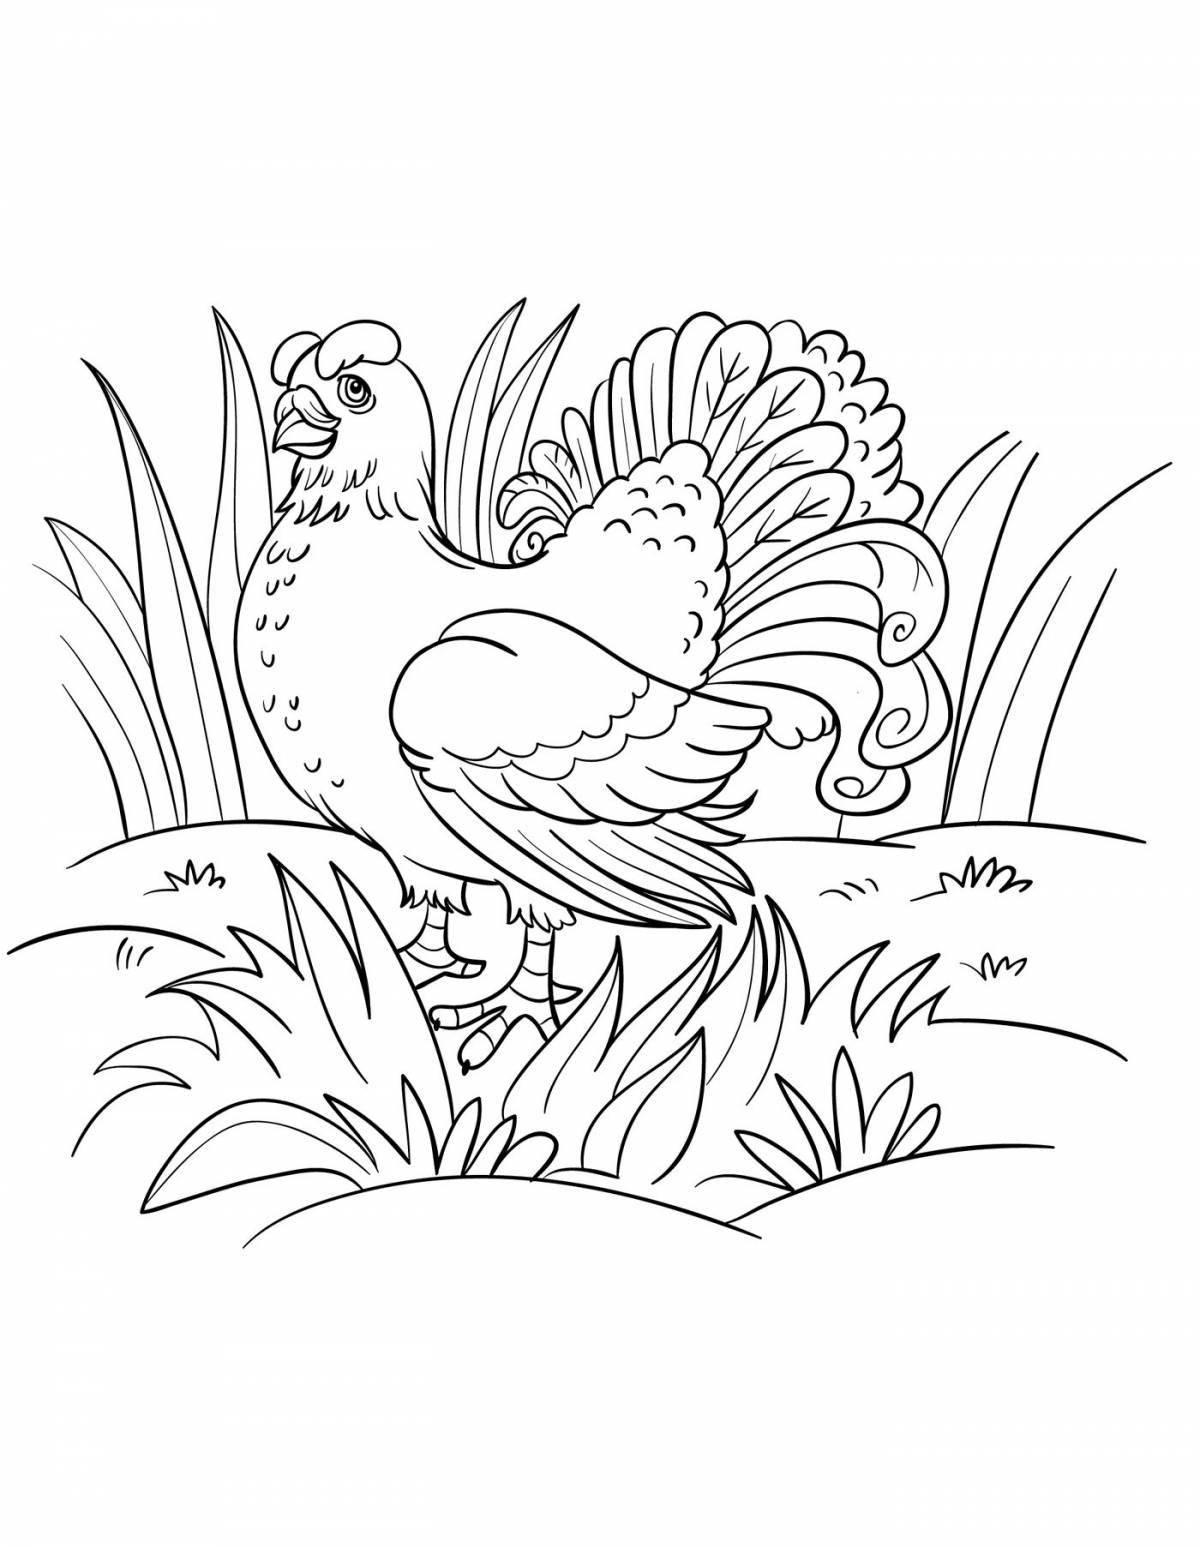 Outstanding capercaillie coloring page for kids